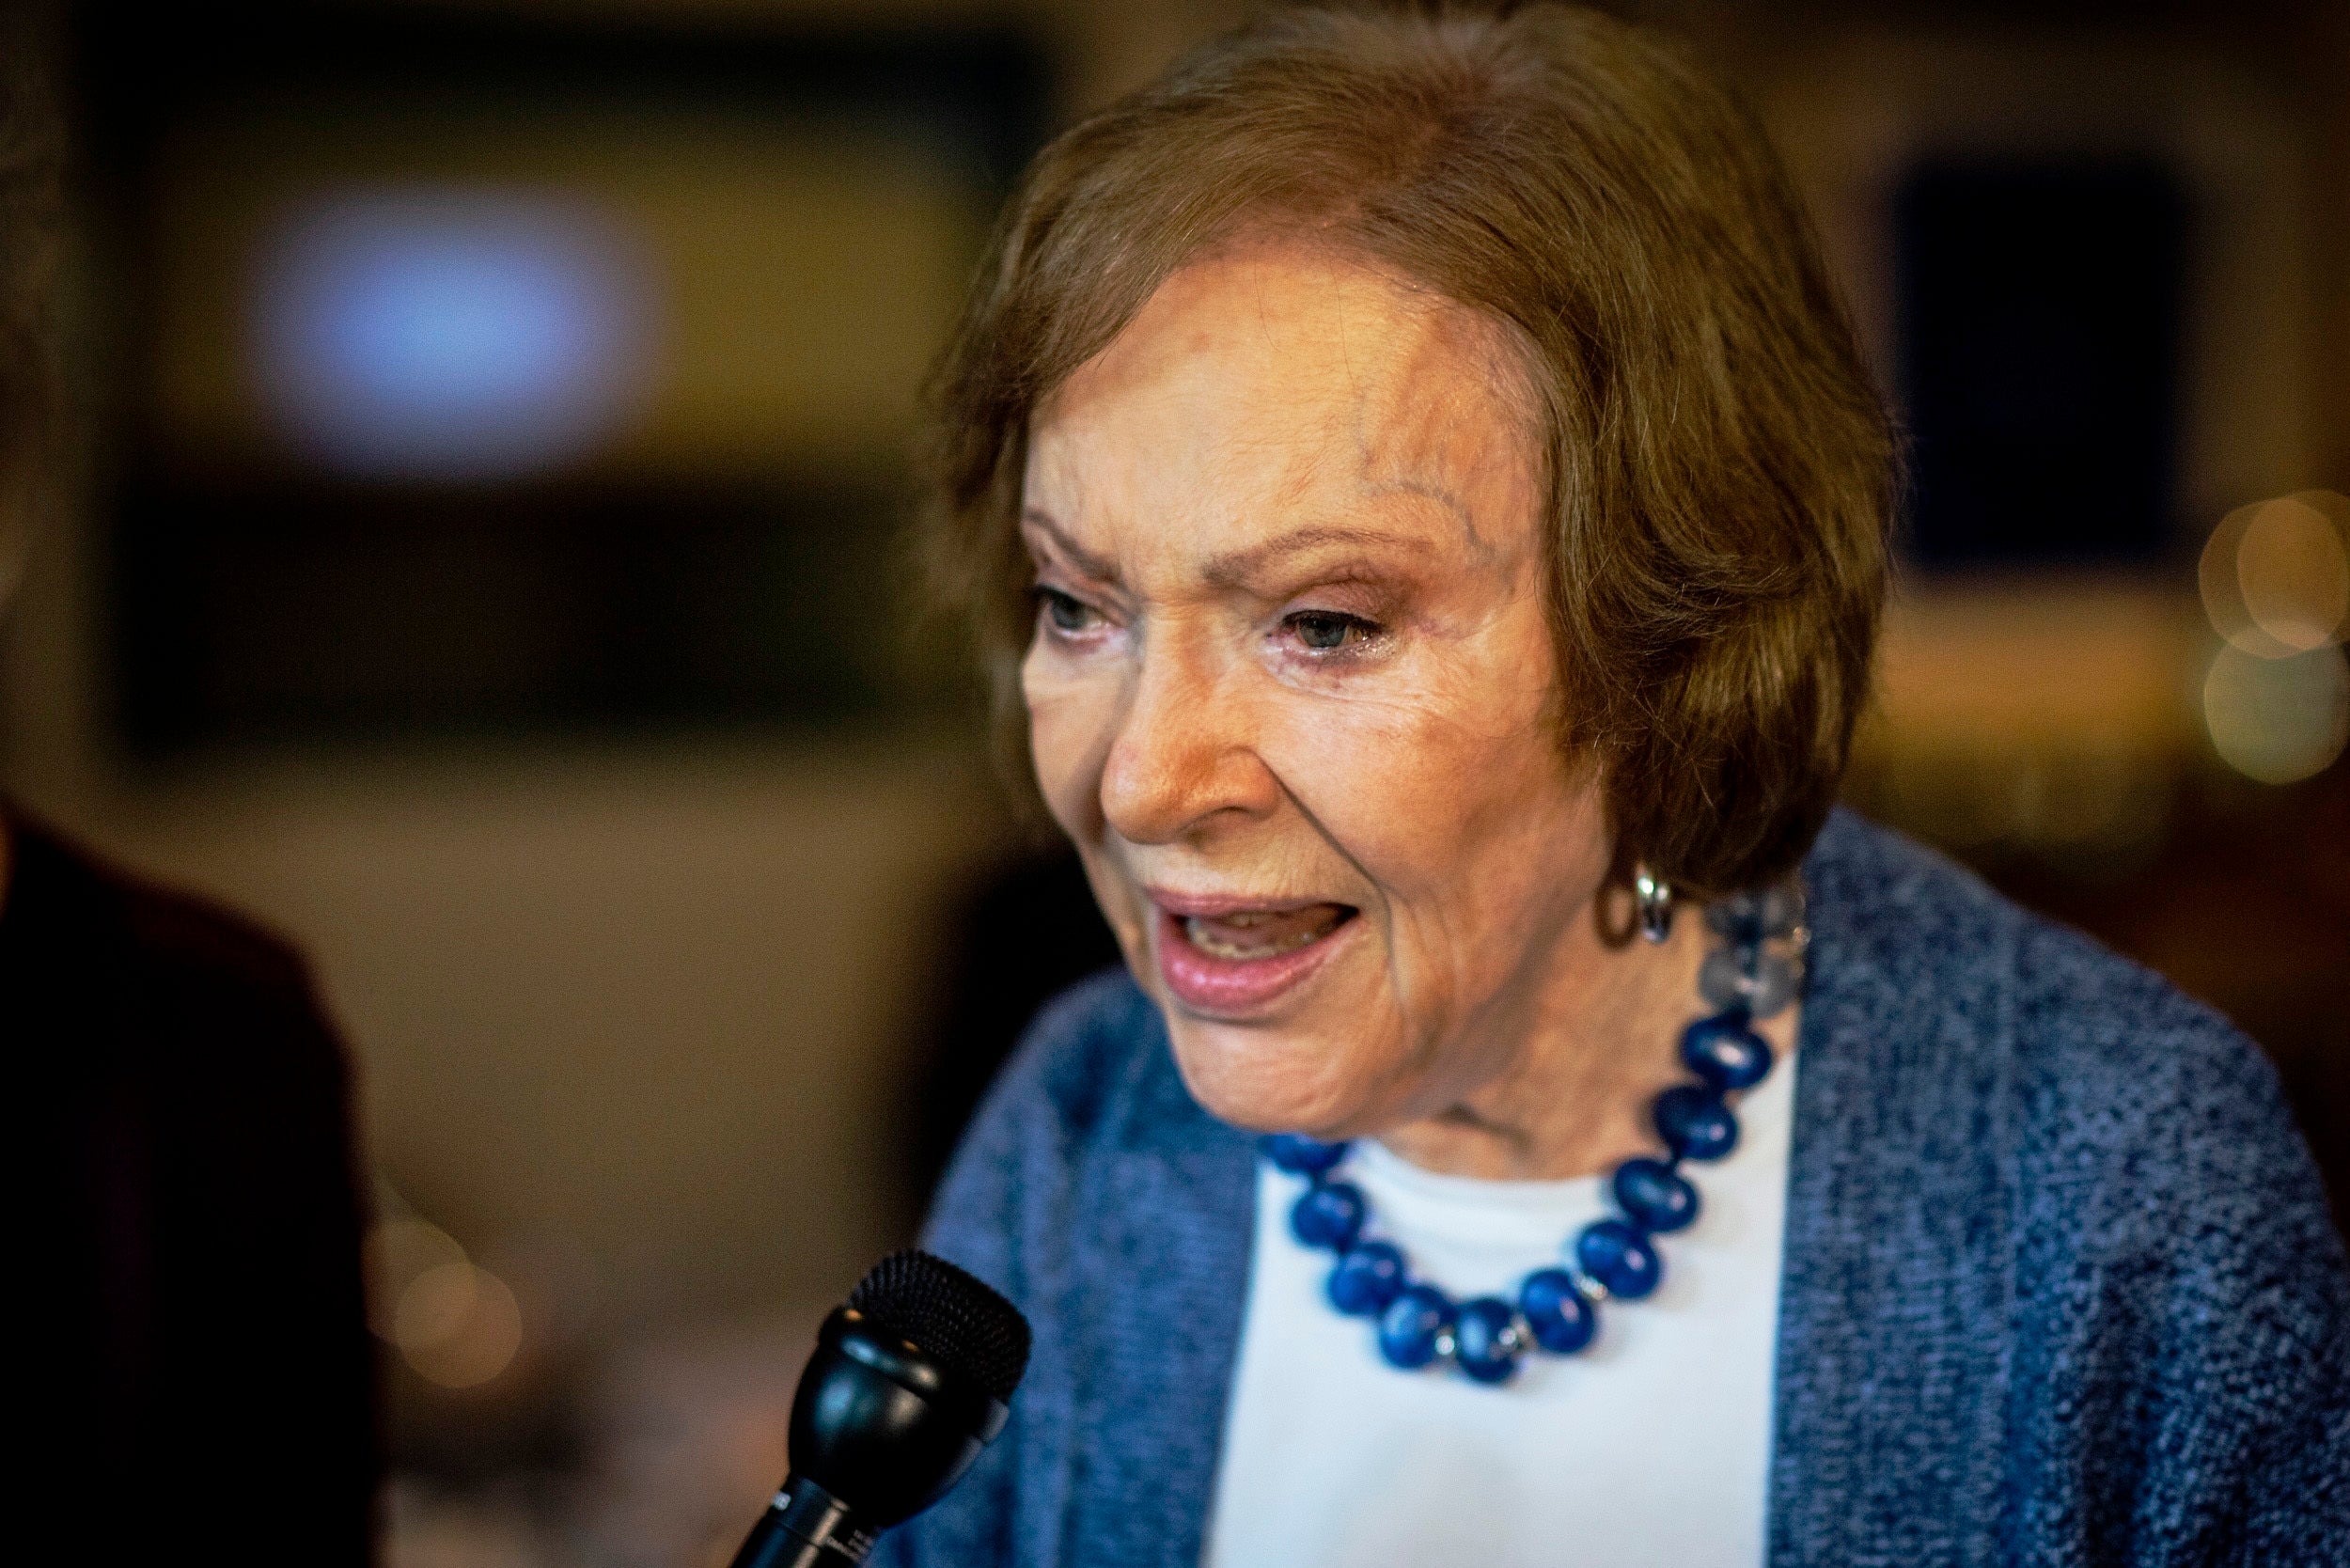 The former first lady Rosalynn Carter speaks to the press at conference at The Carter Center on Nov. 5, 2019, in Atlanta